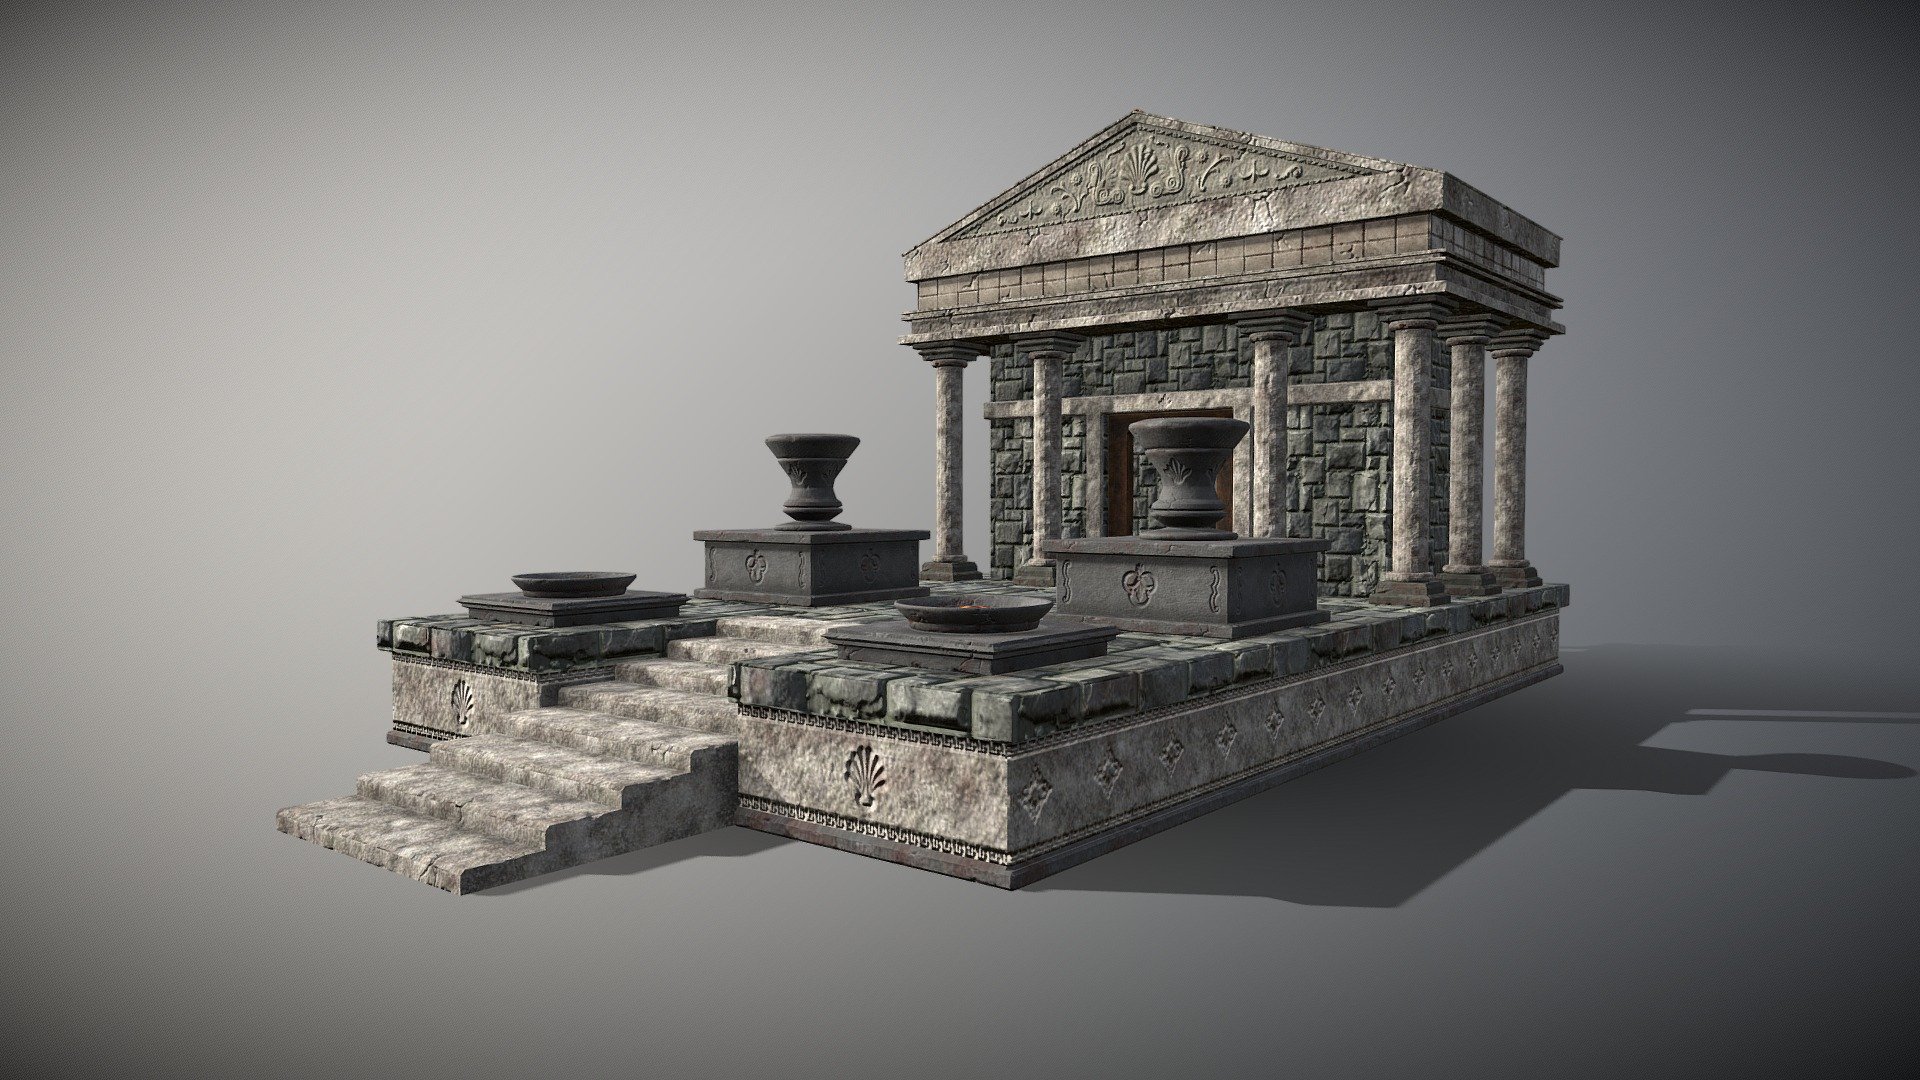 Greek Worship Temple

A Greek Worship Temple, their gods meant everything to them, so to speak with the greater powers gave them a sense of protection, from around 250BC.  

Modelled in Blender 2.79

Tested in 2.80/2.93

Textured in Substance Painter 2

Low-Poly Model

Tested with both EEVEE &amp; Cycles render engines

Please note if you are using EEVEE:

You may need to go into the Render Properties Tab - Performance - Enable High Quality Normals

Nice Low-Poly Asset for your project

This is a .blend file

Any queries please do get in touch

If you do decide to purchase this Model I wish to thank you in advance

Thanks for your interest &amp; support!

MagicCGIStudios - Greek Worship Temple - Low Poly - Buy Royalty Free 3D model by MagicCGIStudios 3d model